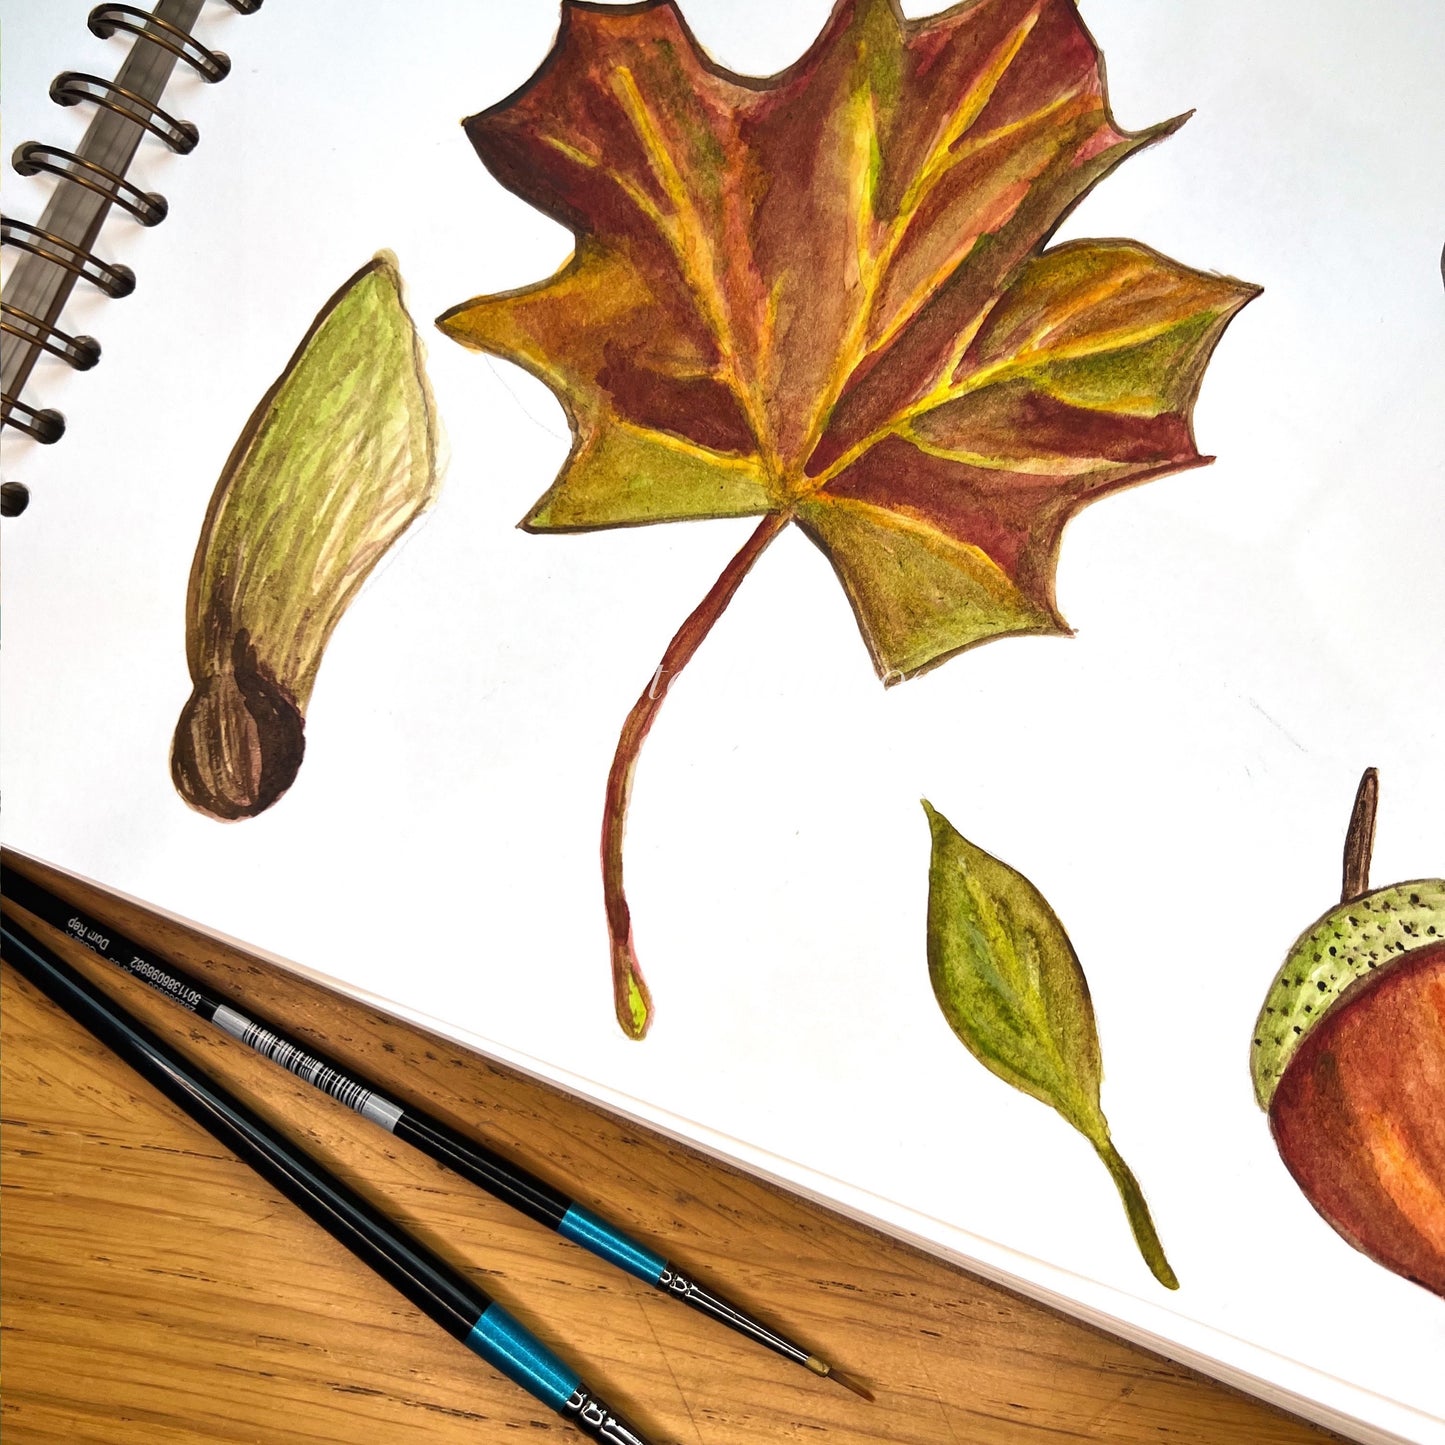 Original watercolour paintings of maple leave and sycamore seed by Kat Lovatt